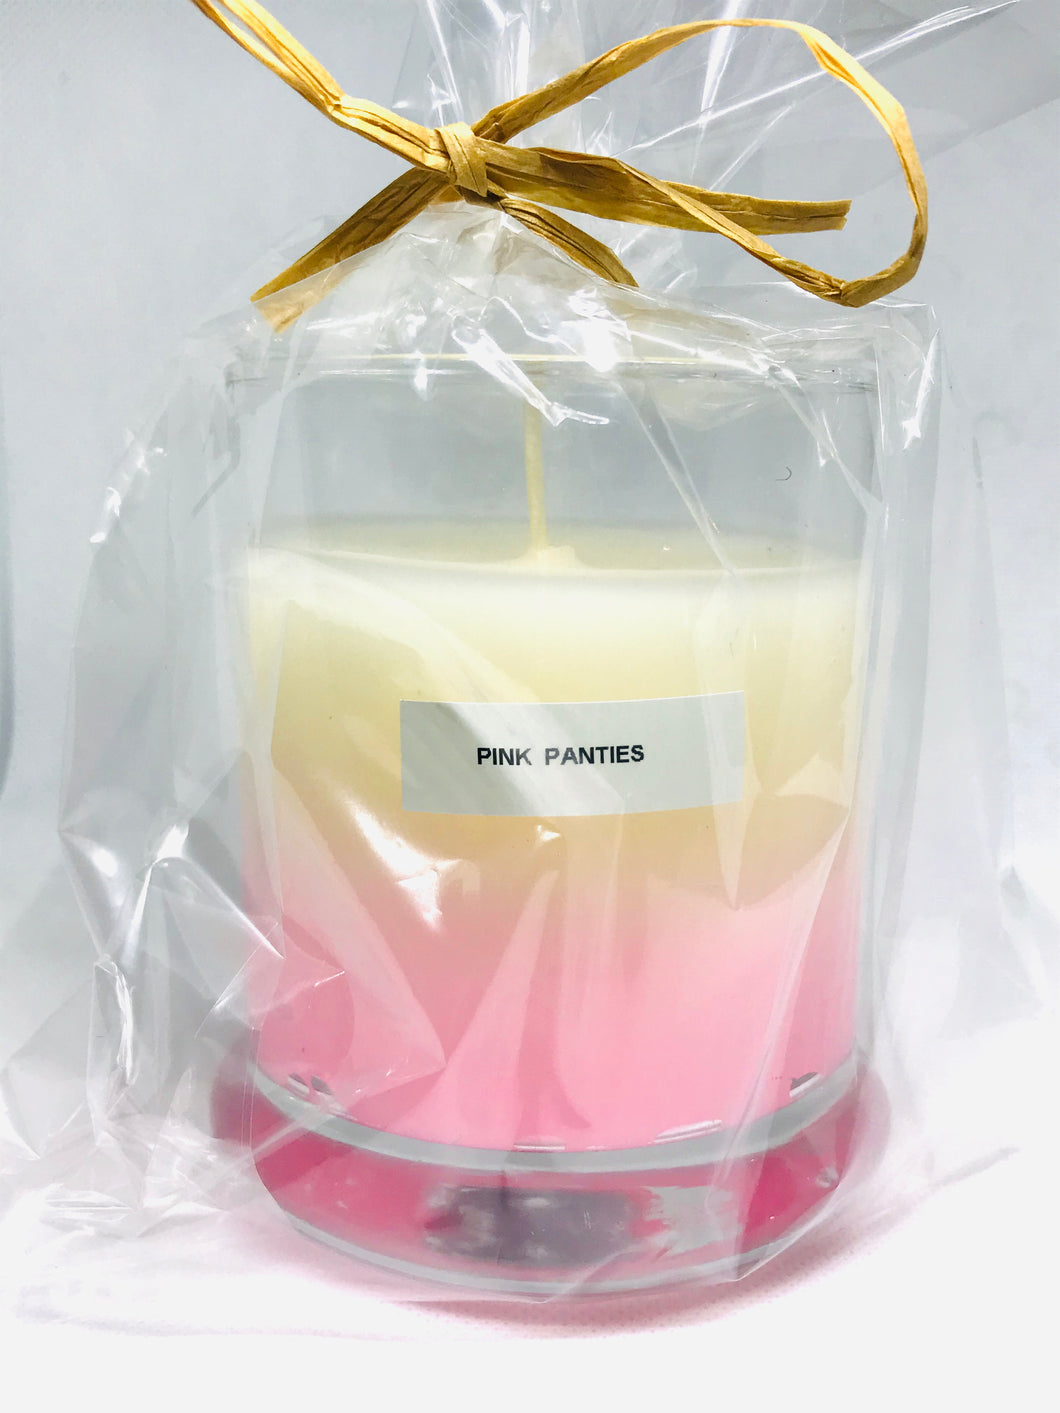 Pink Panties Scented Candle